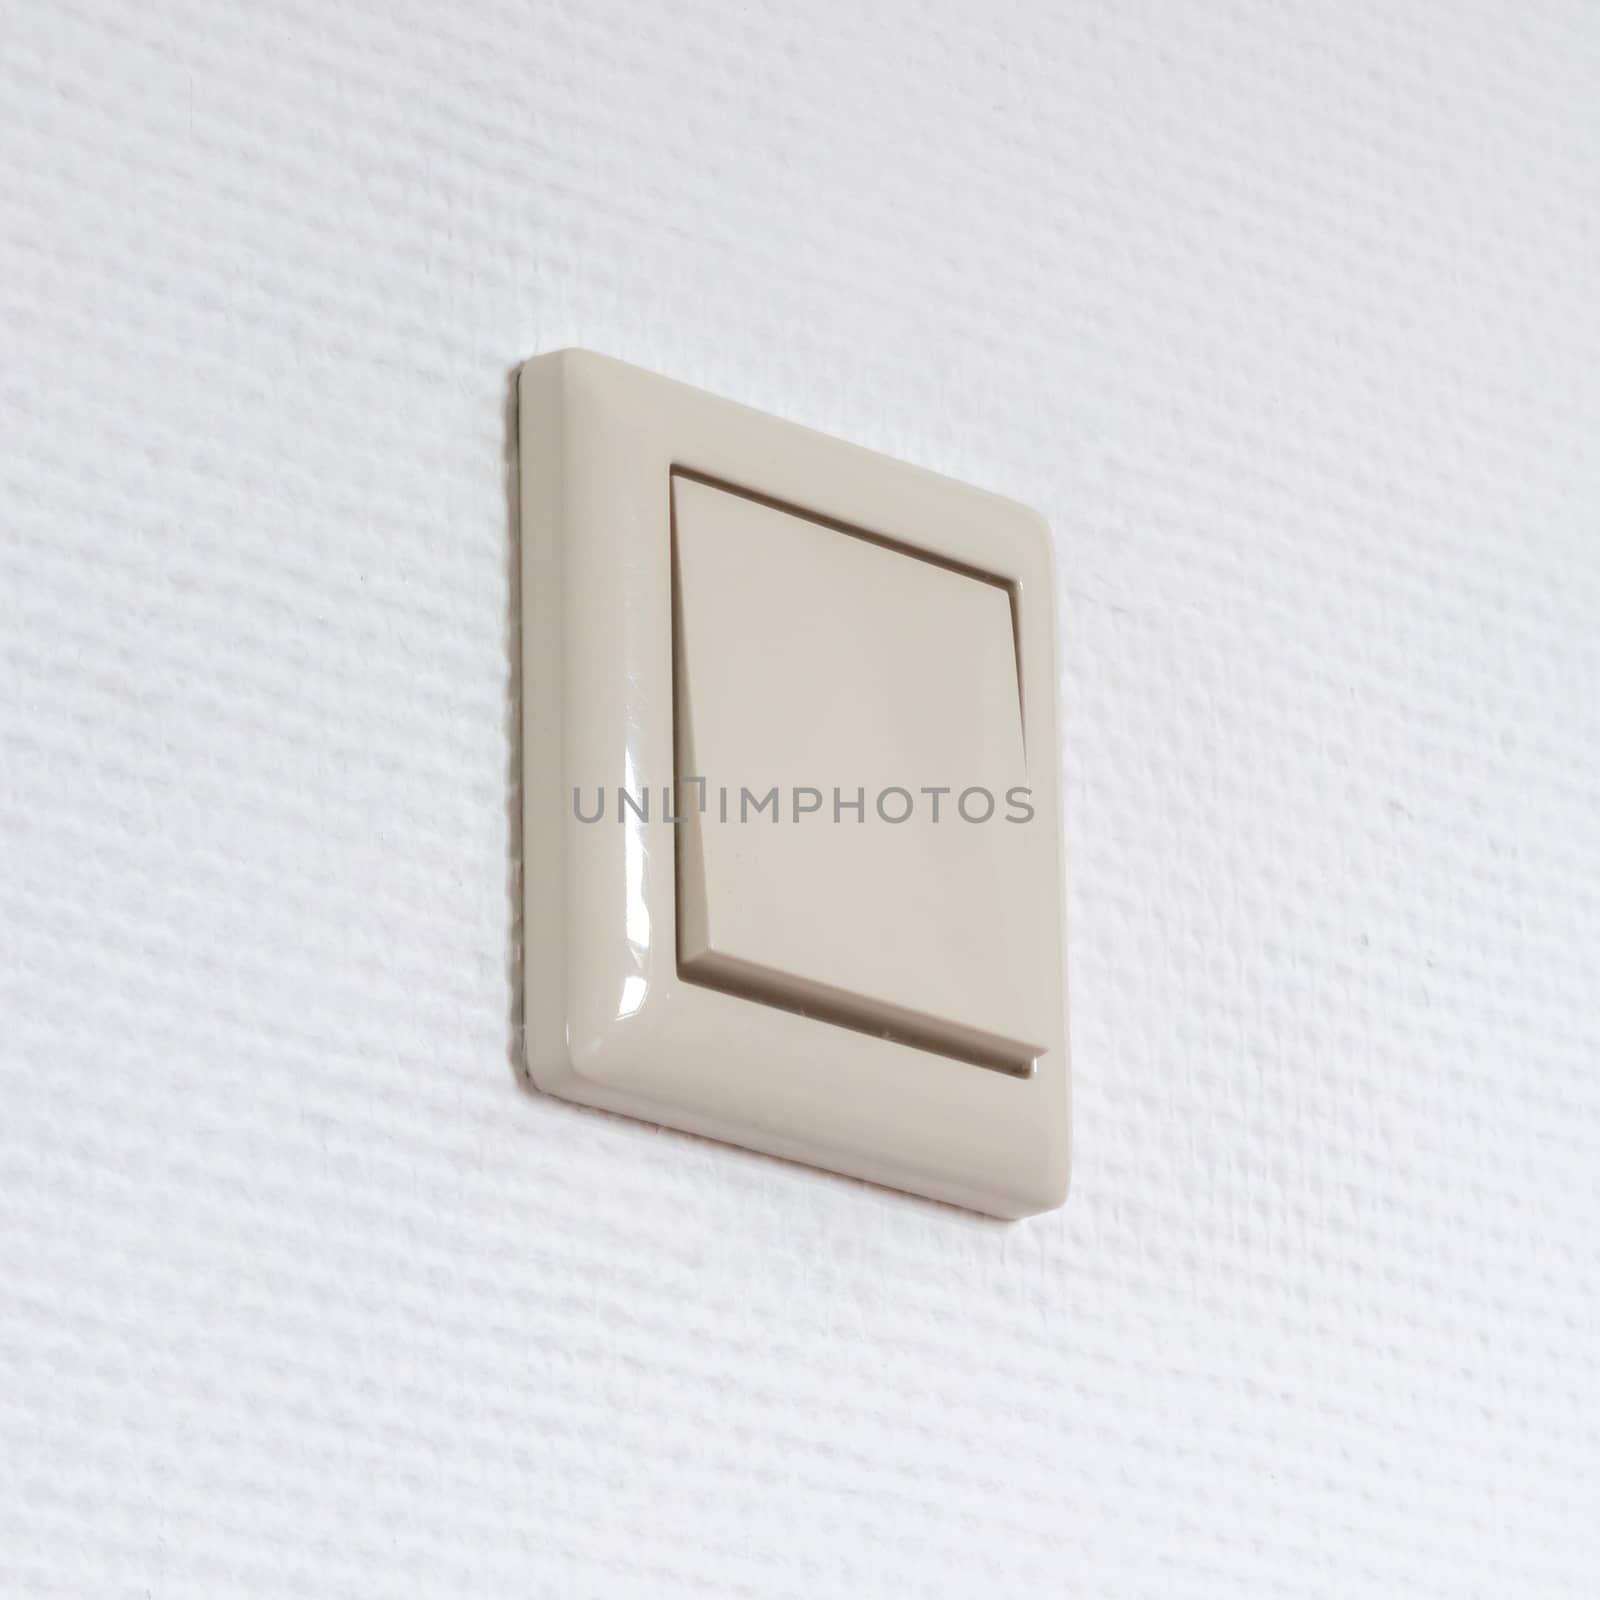 Lightswitch in a common house in the Netherlands